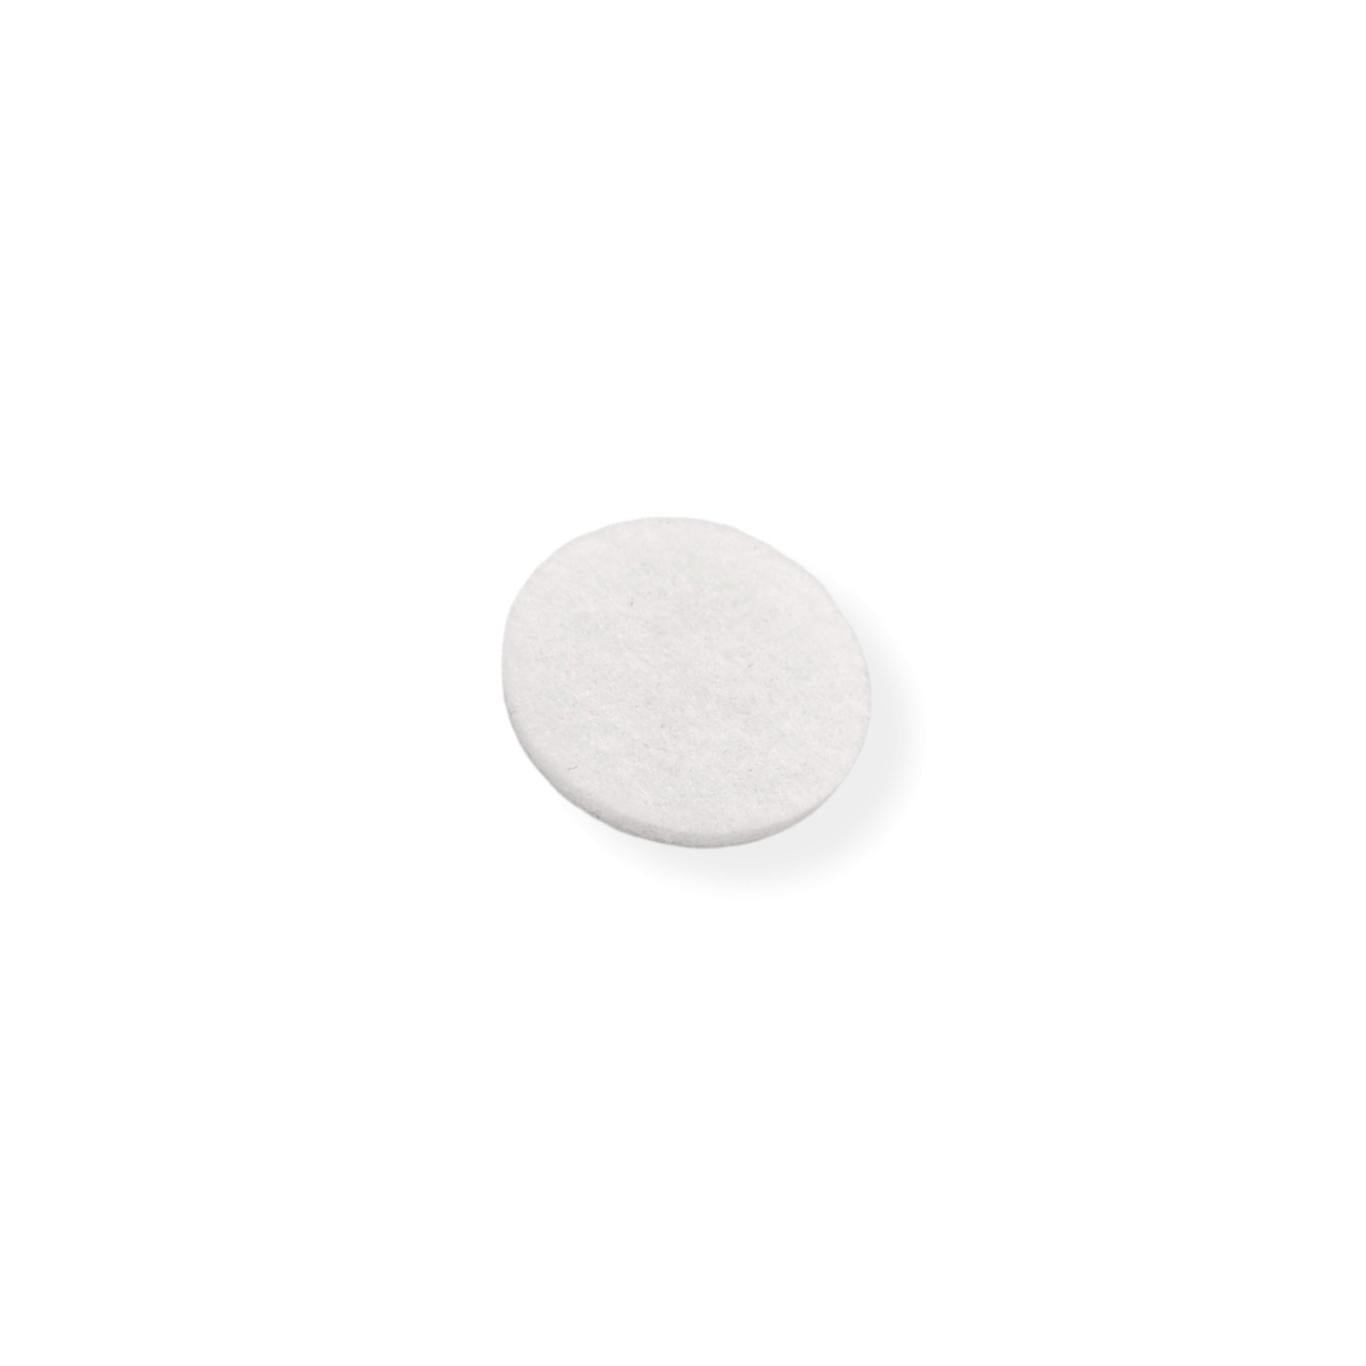 Felt Pads - White Self Adhesive Stick on Felt - Round 13mm Diameter - Made in Germany - Keay Vital Parts